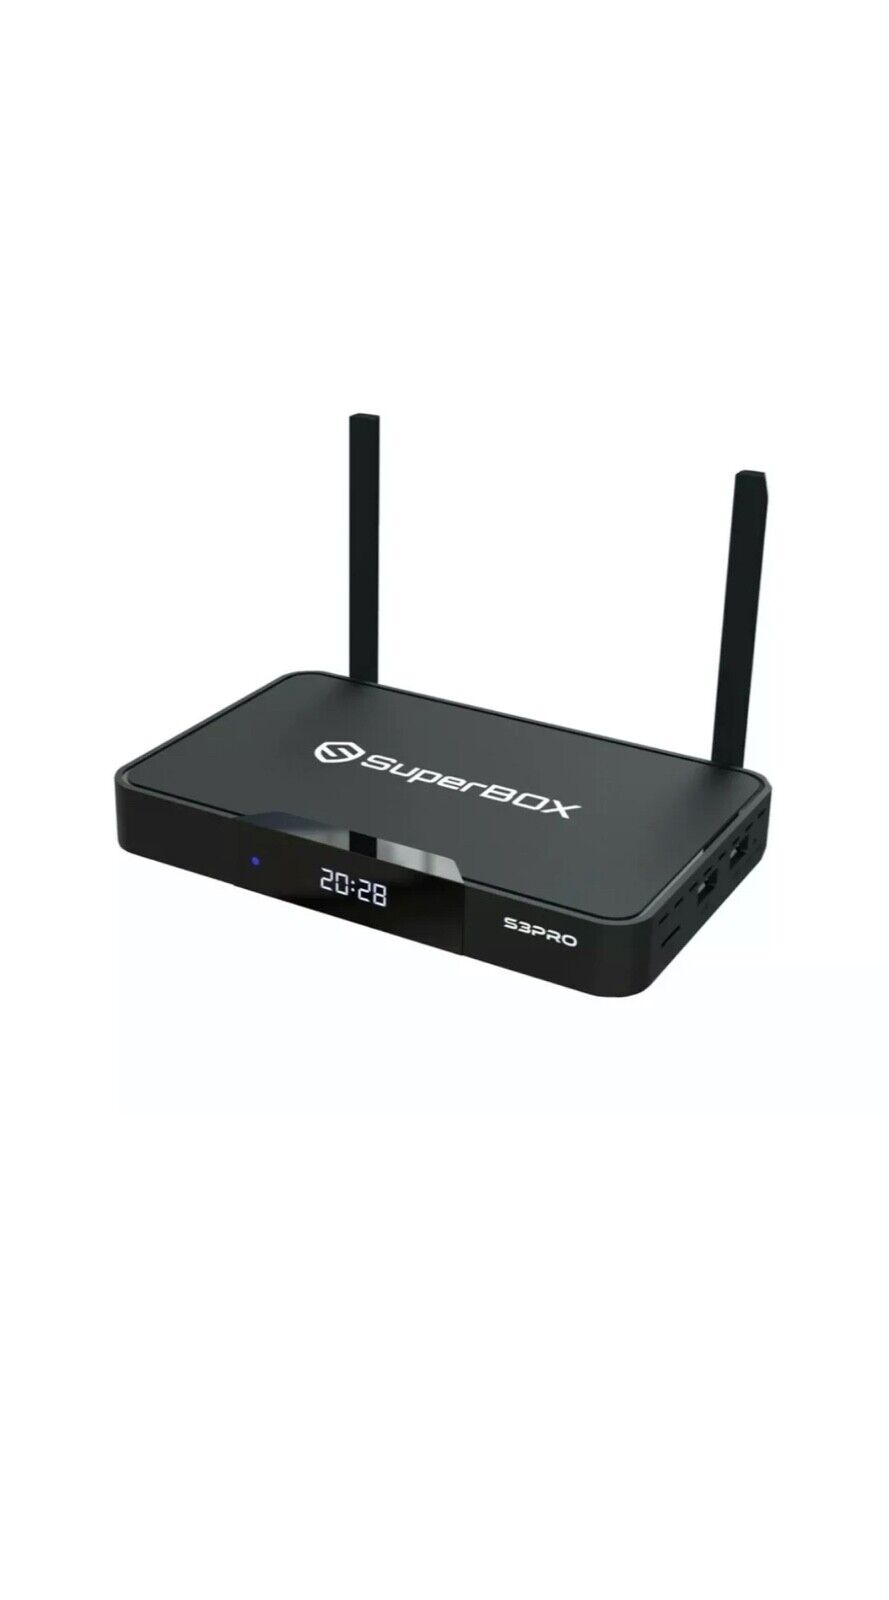 Superbox S3 PRO 2GB+32GB Wi-Fi 2.4G/5G with Voice command